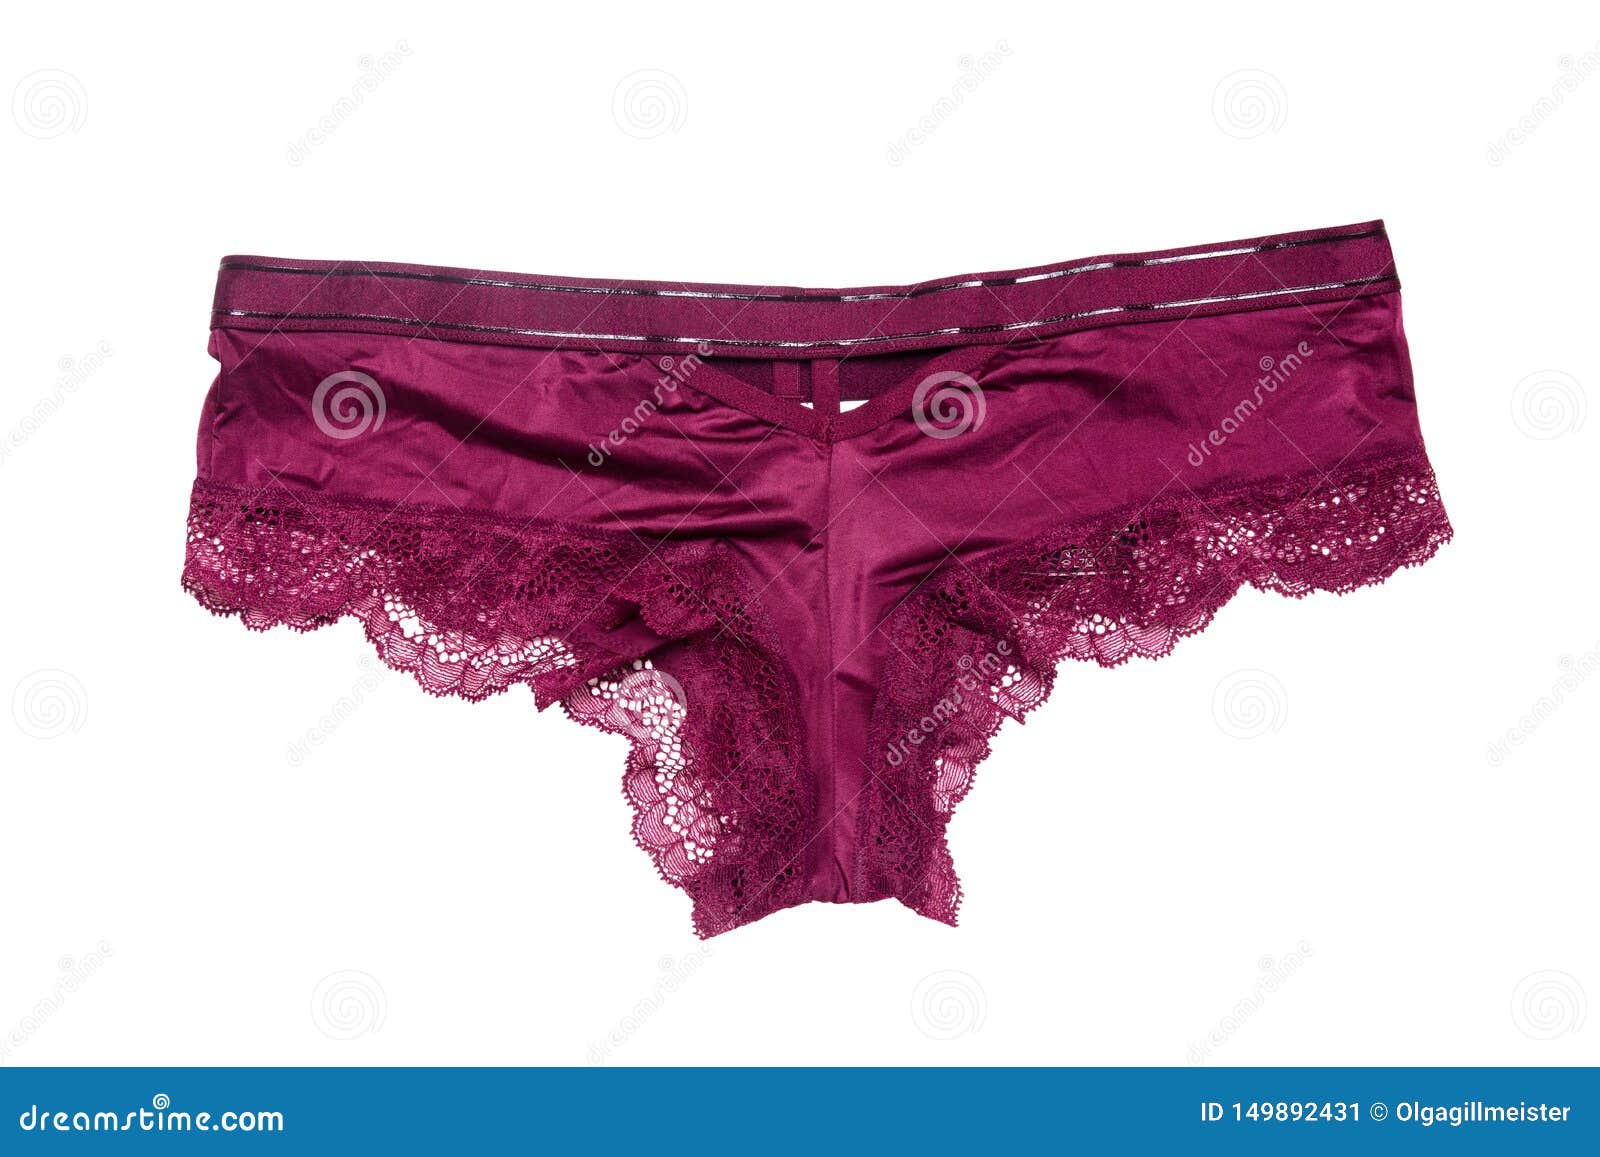 Underwear Woman Isolated. Close-up of Luxurious Elegant Pink Satin Lacy  Panties Isolated on a White Background Stock Image - Image of feminine,  beauty: 149892431